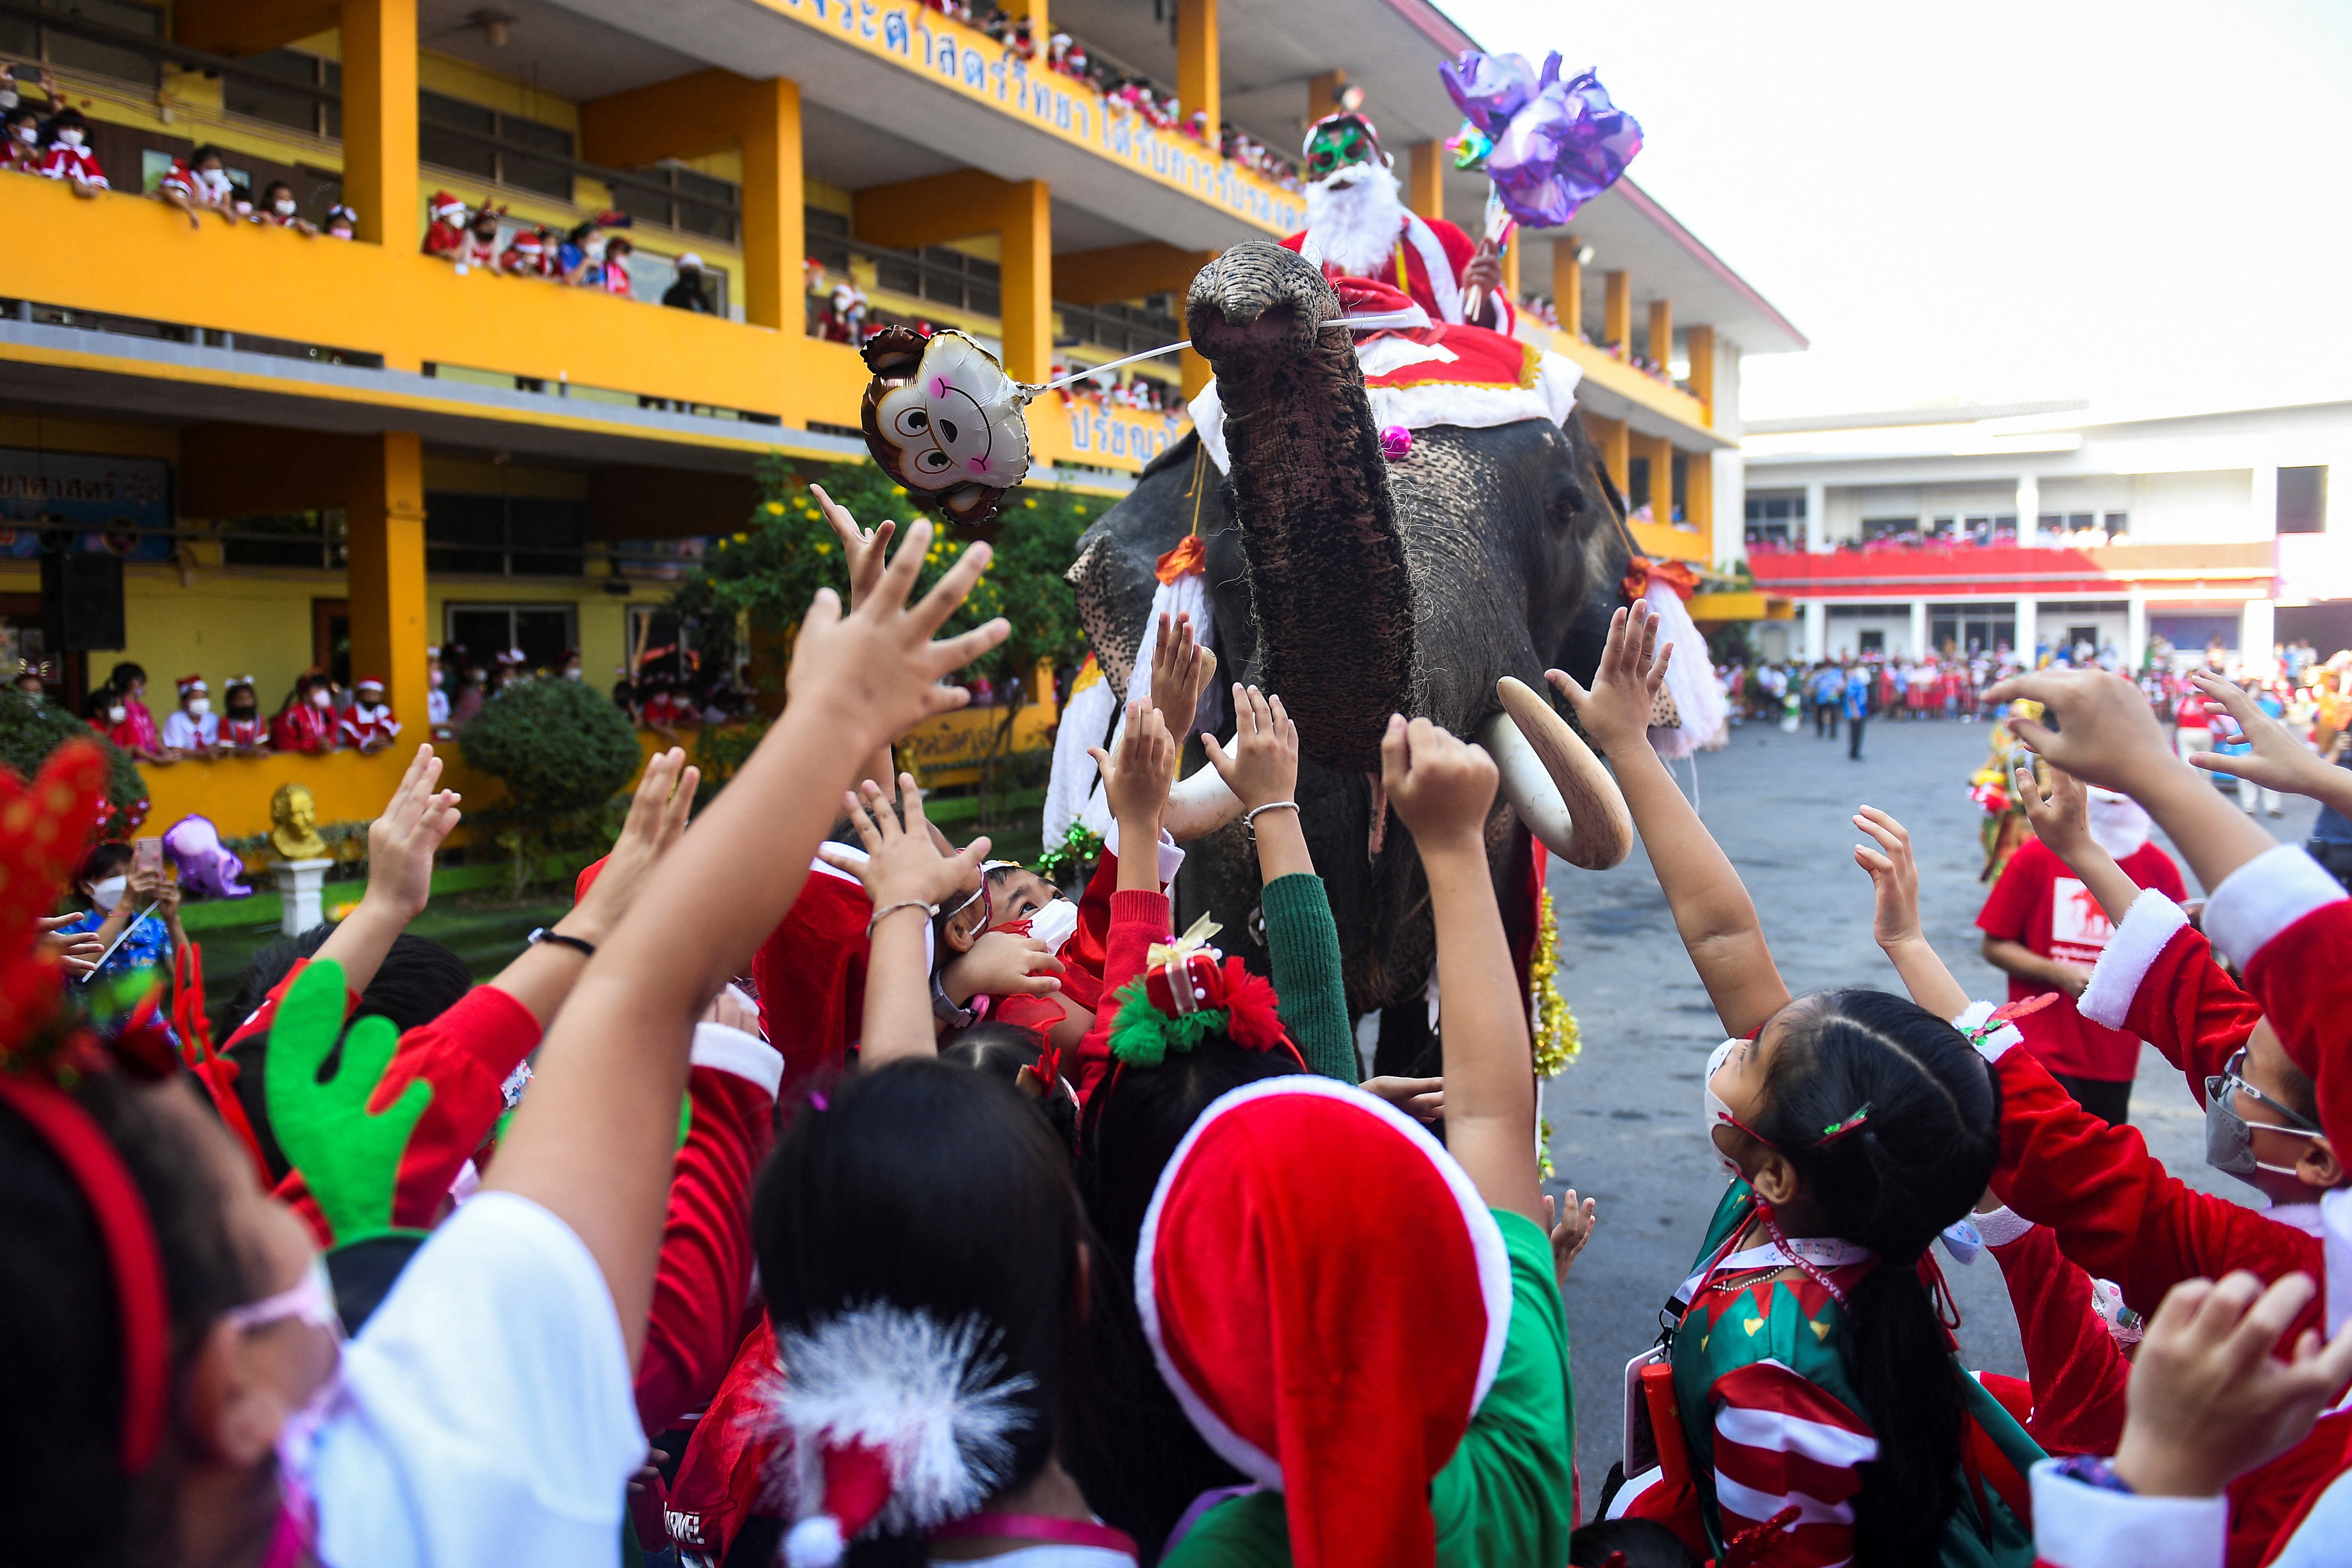 Elephants in Santa Claus costumes visit a school in Ayutthaya